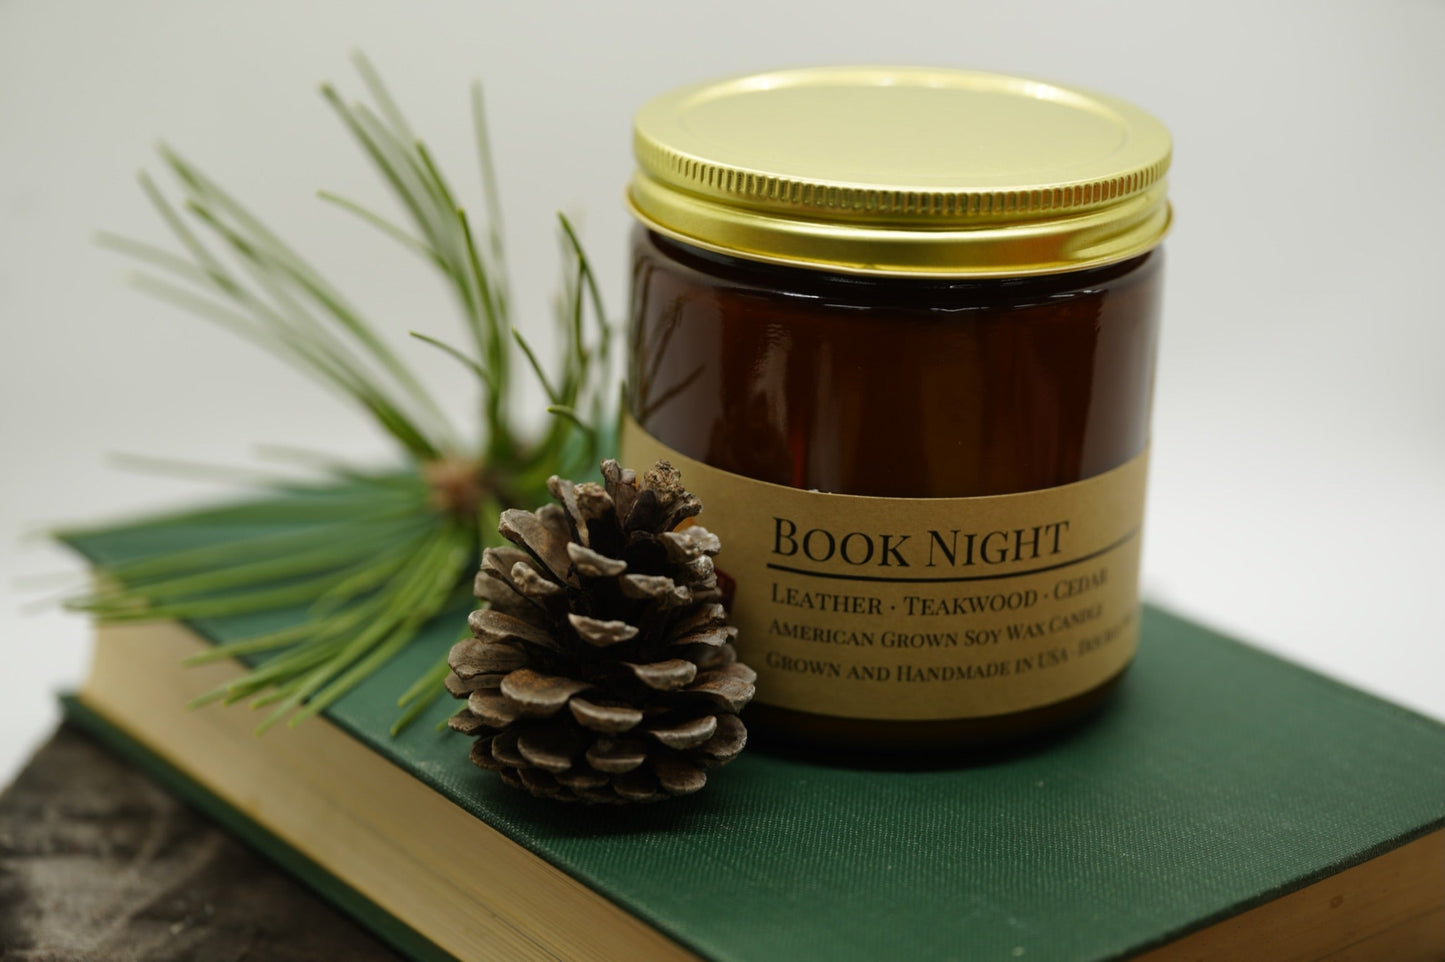 Book Night Soy Candle | 16 oz Double Wick Amber Apothecary Jar